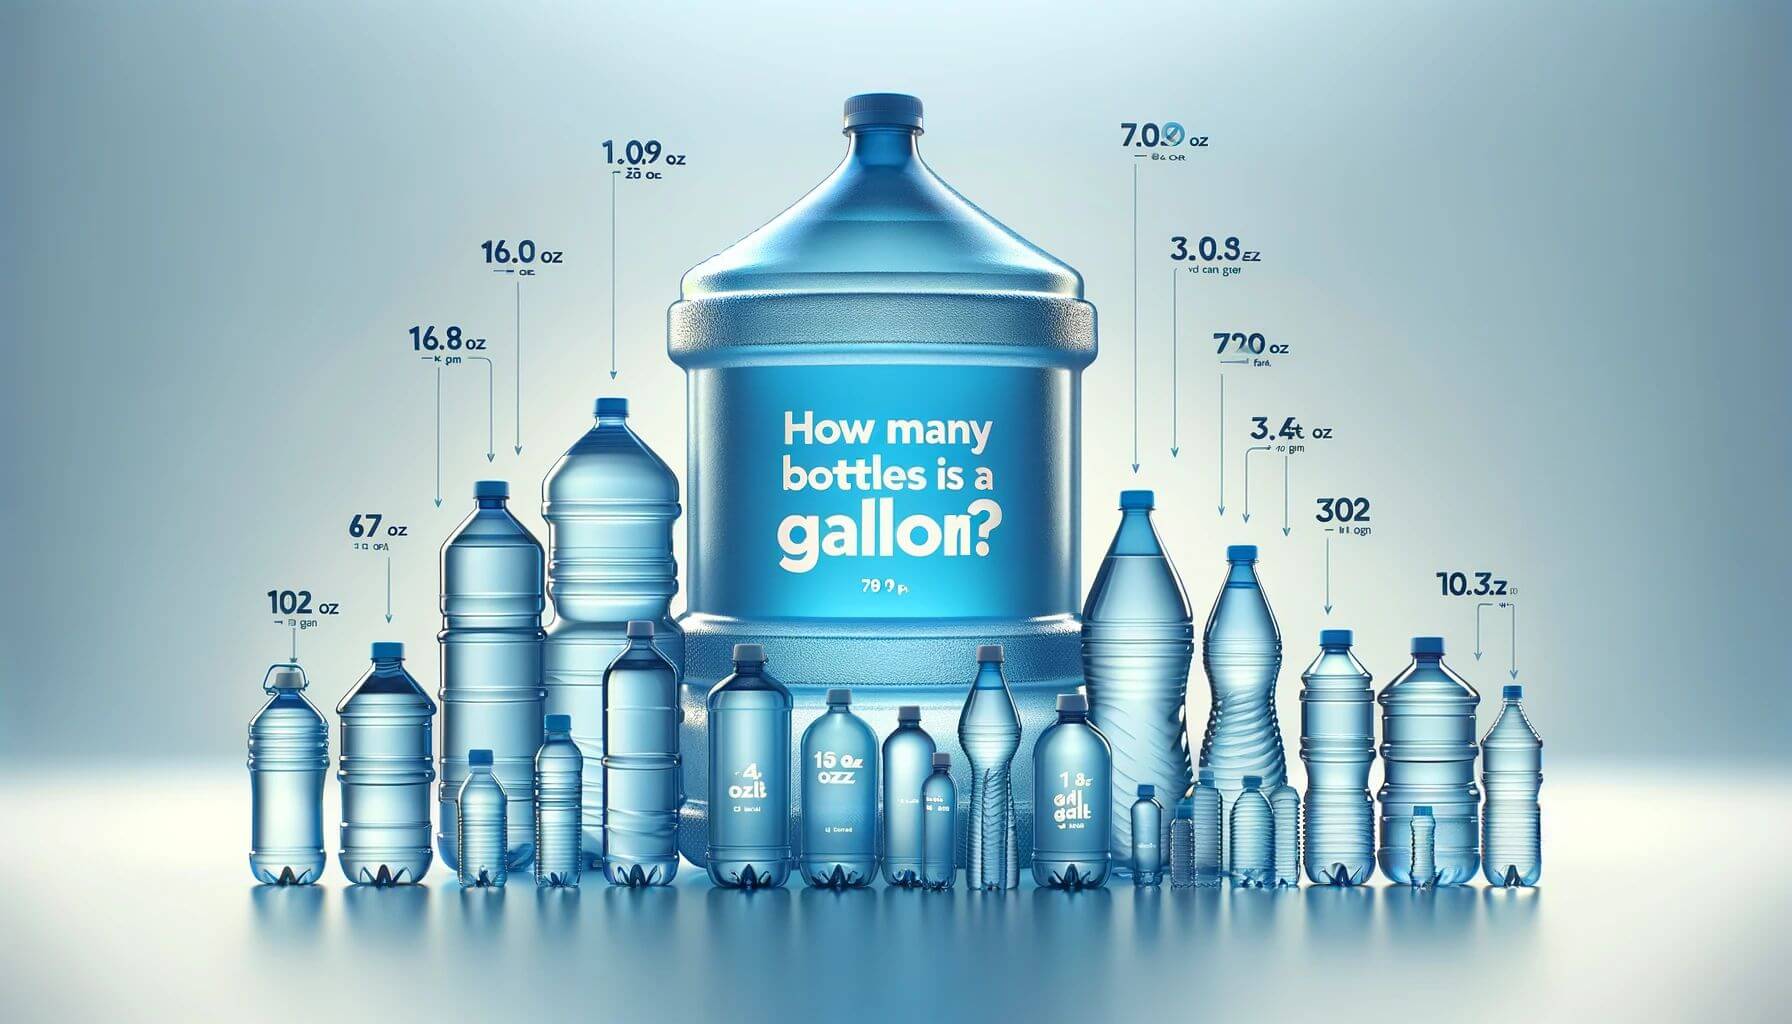 A featured image for the article 'How Many Bottles of Water Is a Gallon'. The image visually represents this question by displaying several different